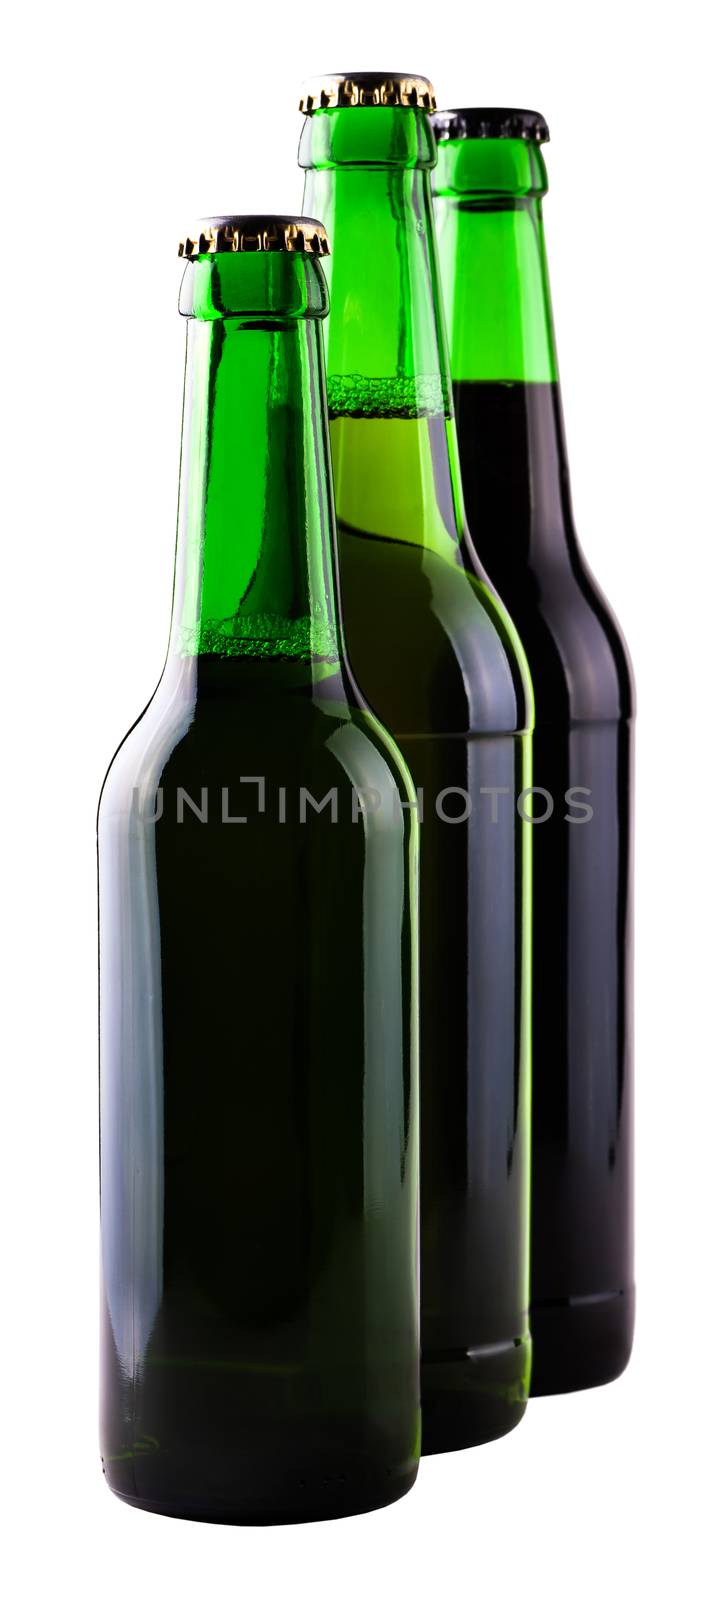 beer in glass bottles of different varieties isolated on white background